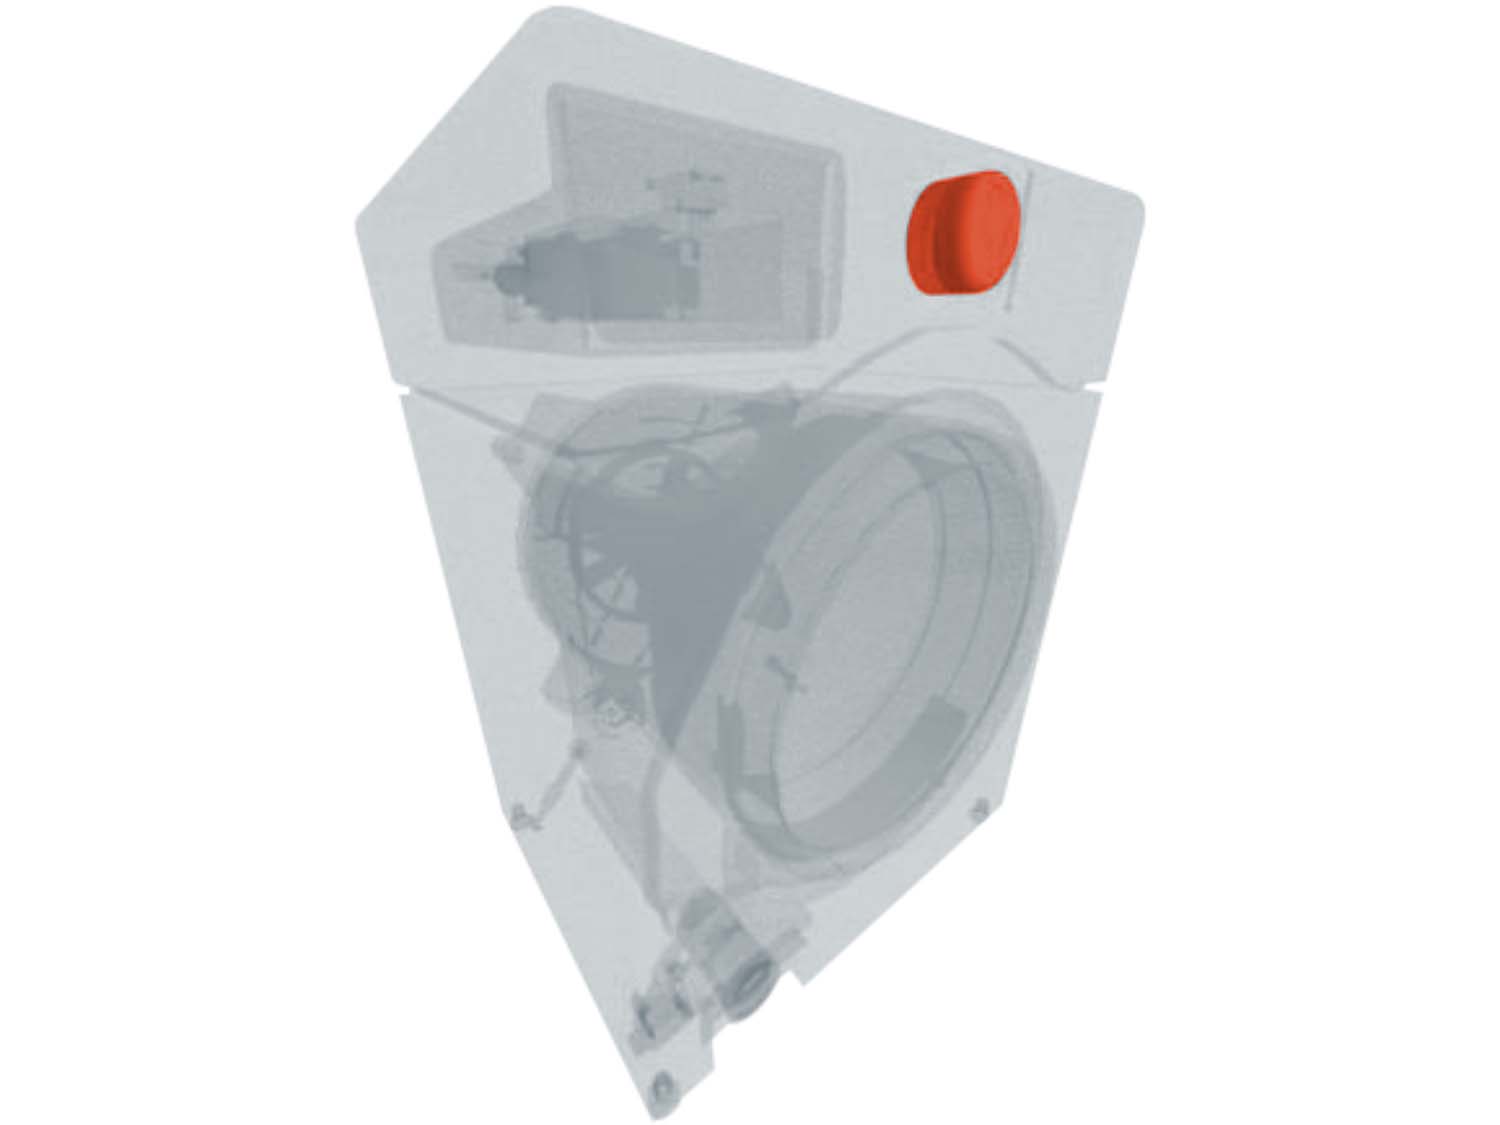 A 3D diagram showing the components of a front load washer and specifying the location of the timer knob